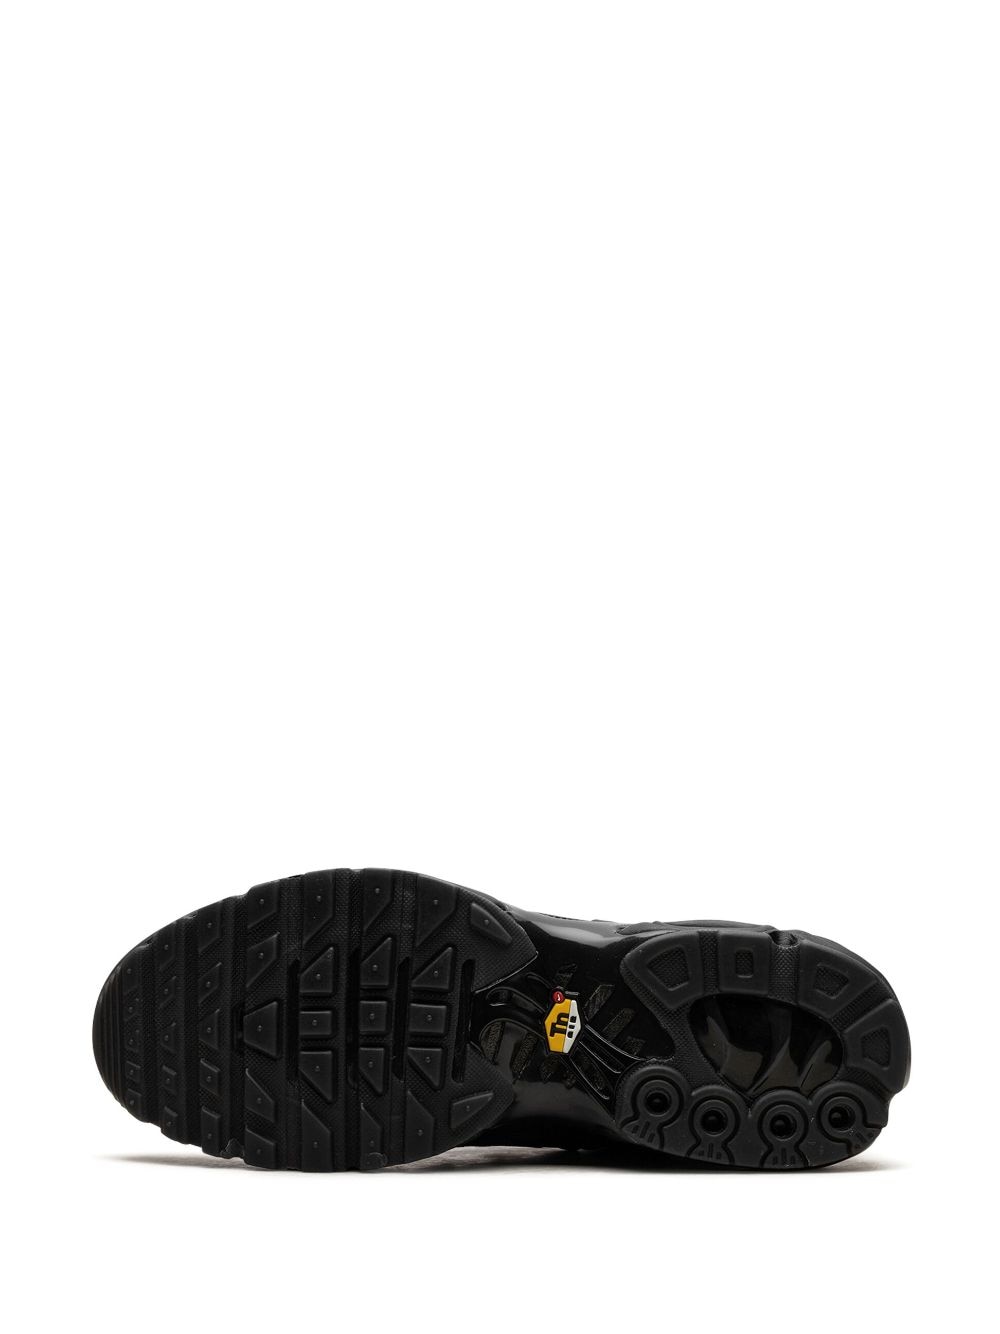 Nike x A-COLD-WALL* Air Max Plus sneakers Black